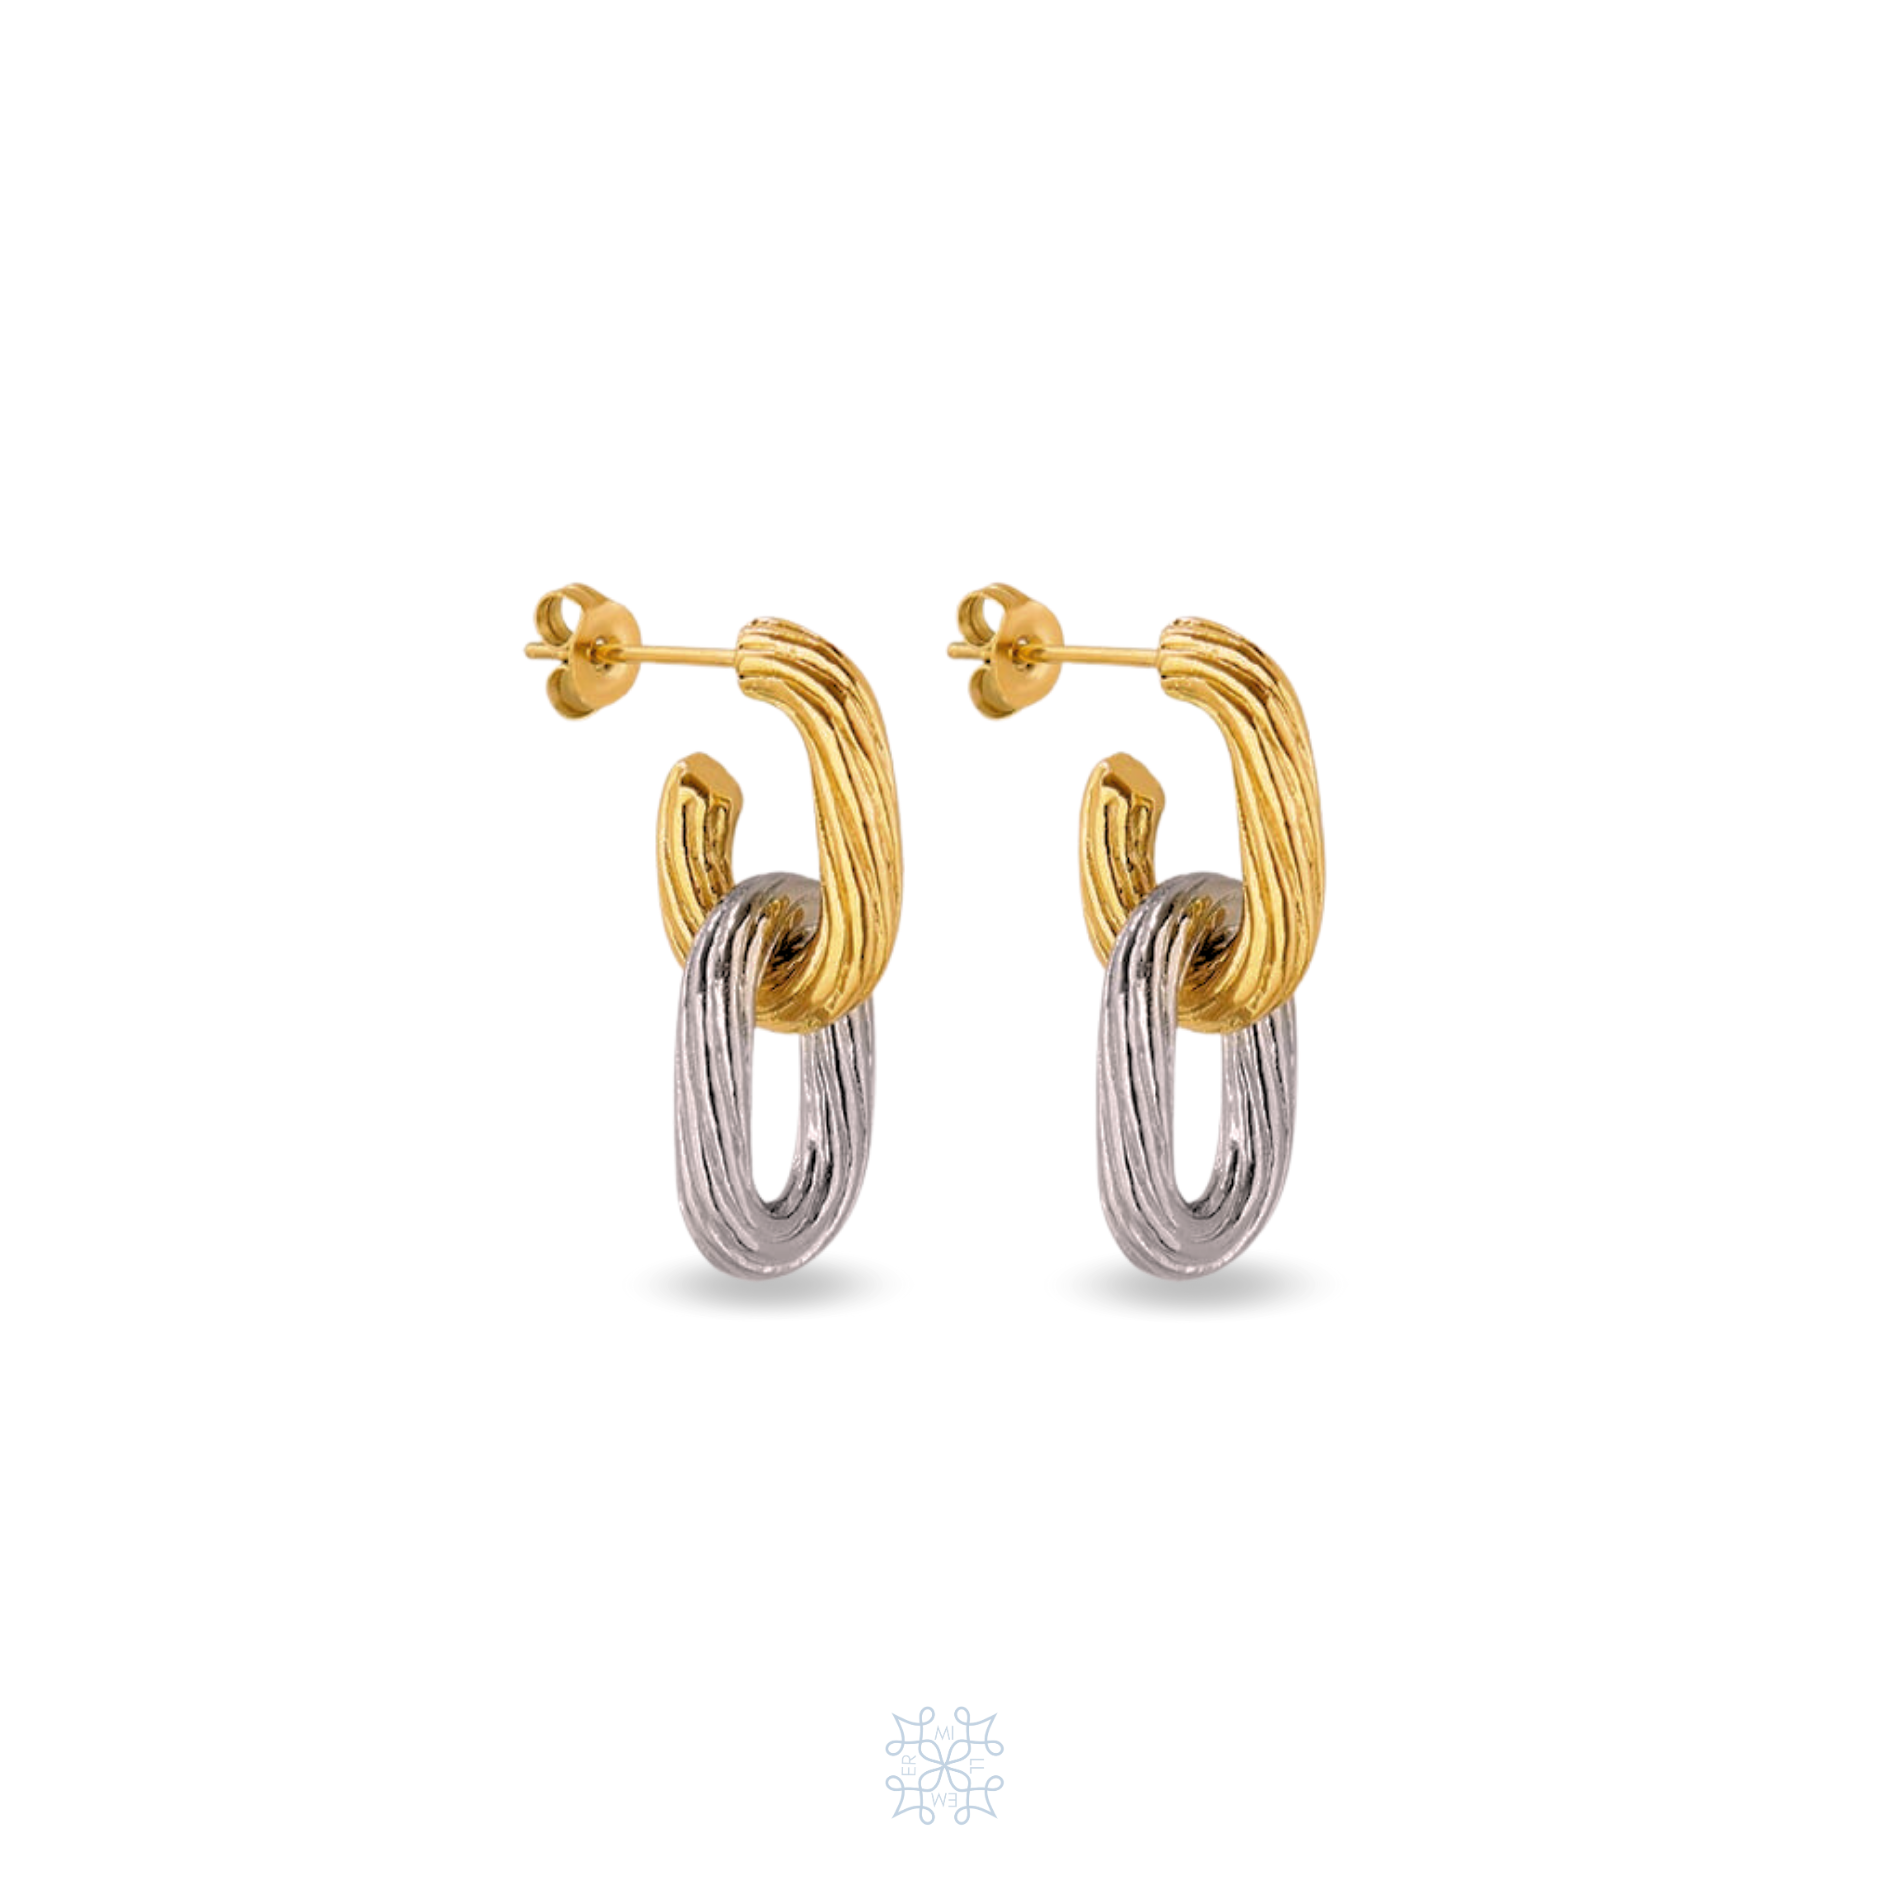 Gold & silver chain earring. The silver part is detachable so you can wear it like a single gold hoop.